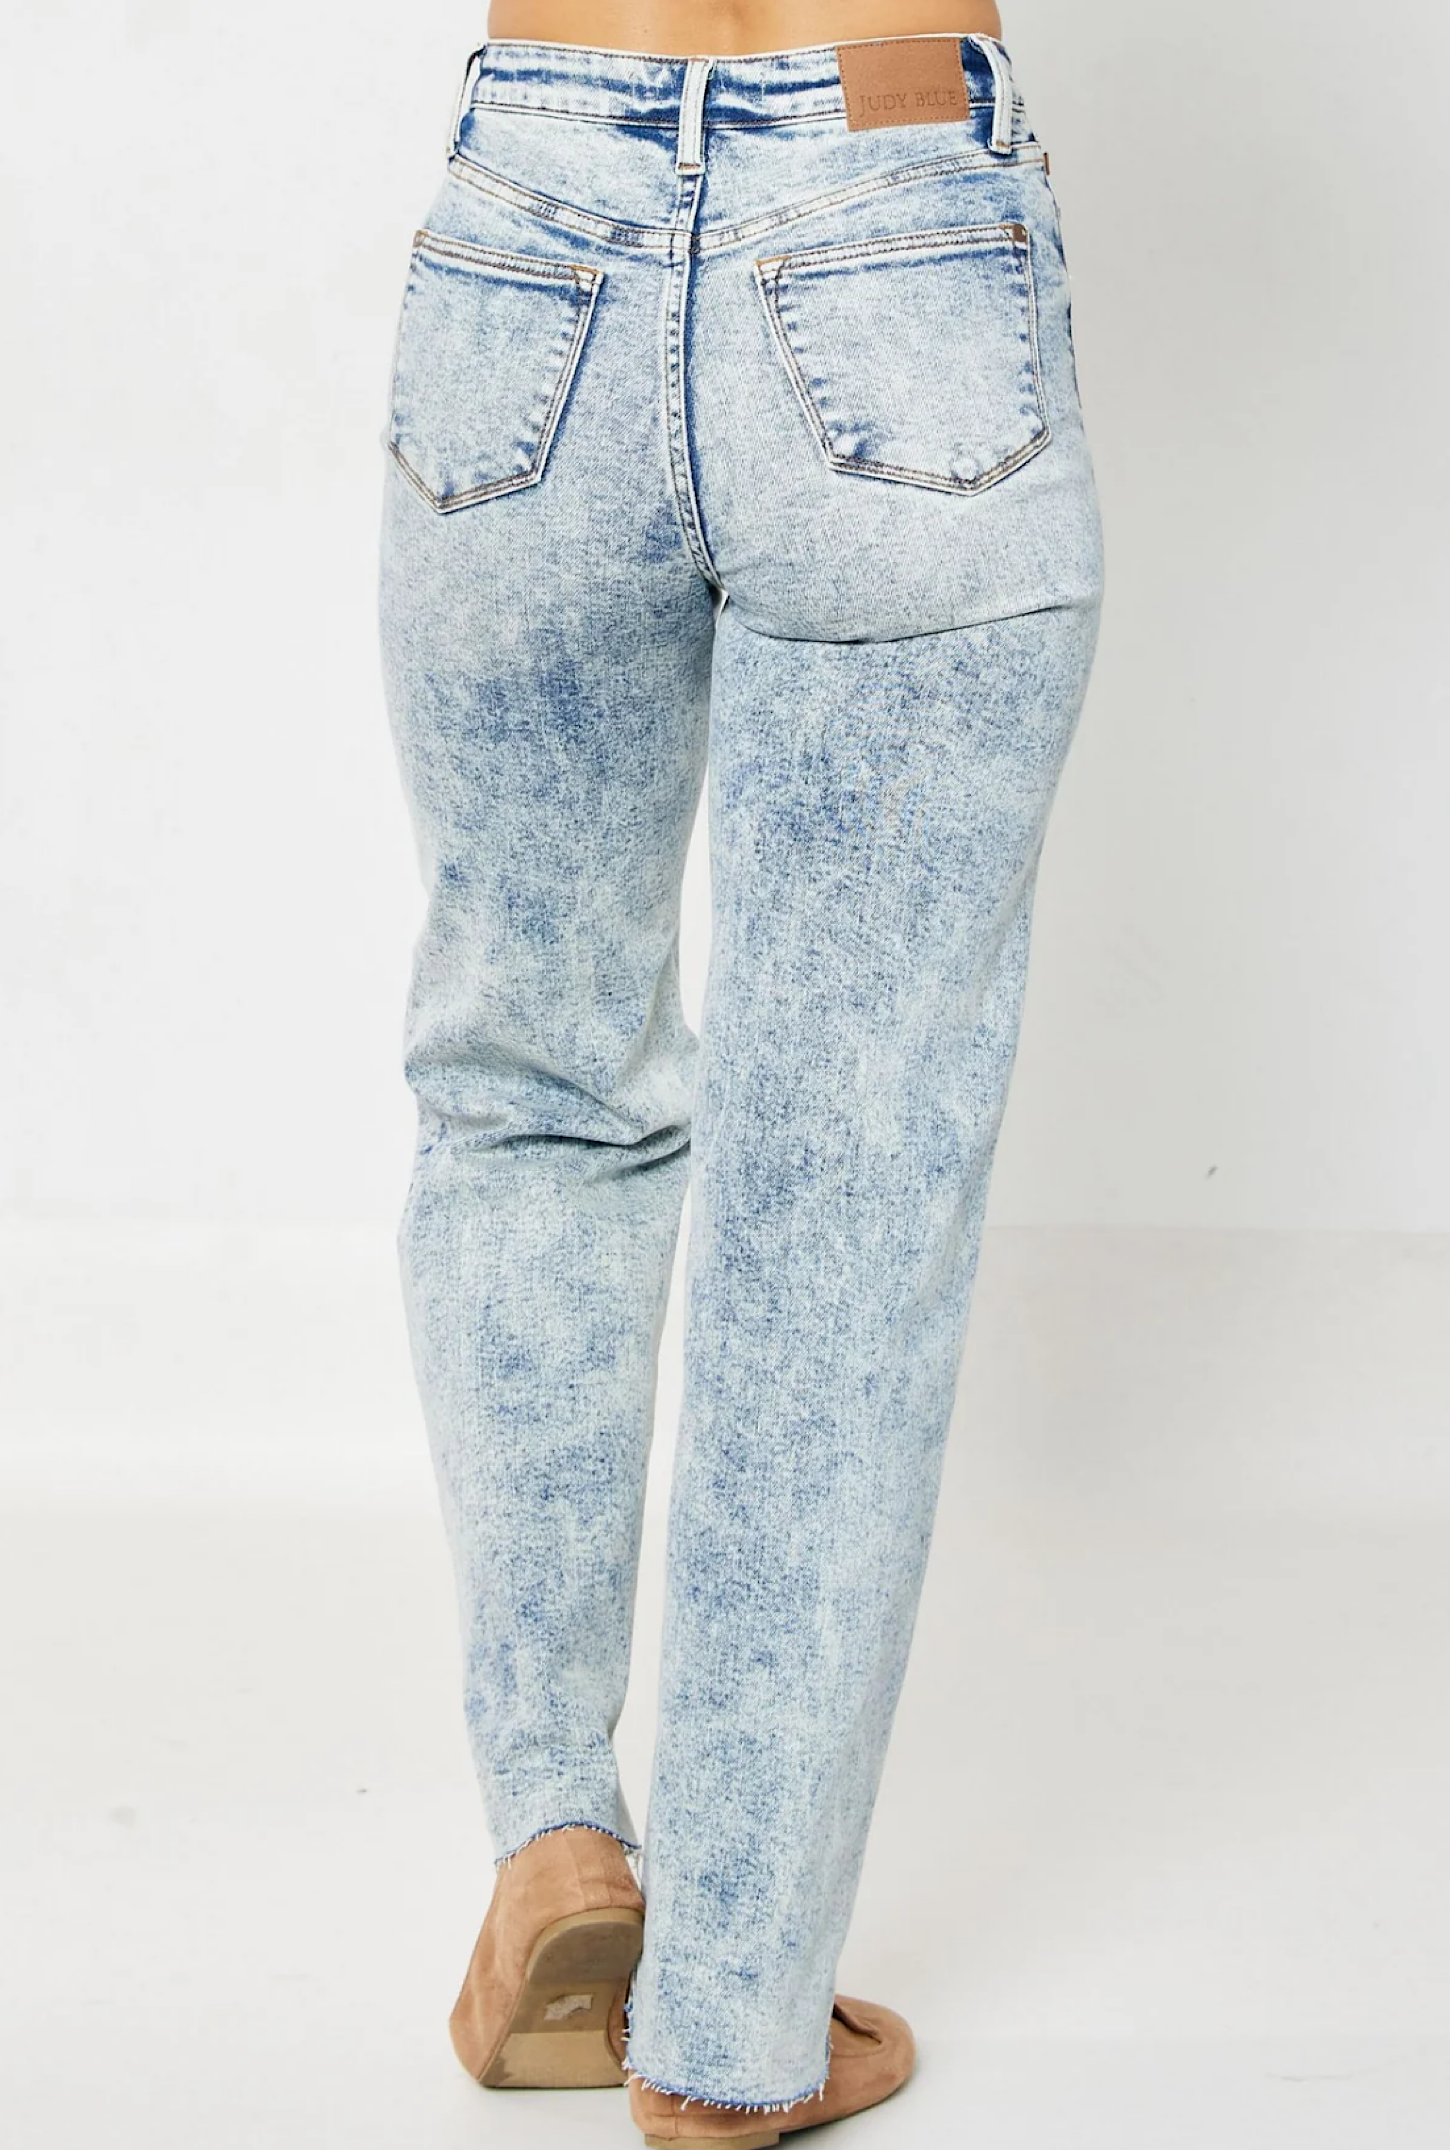 Judy Blue Mineral Wash Jeans